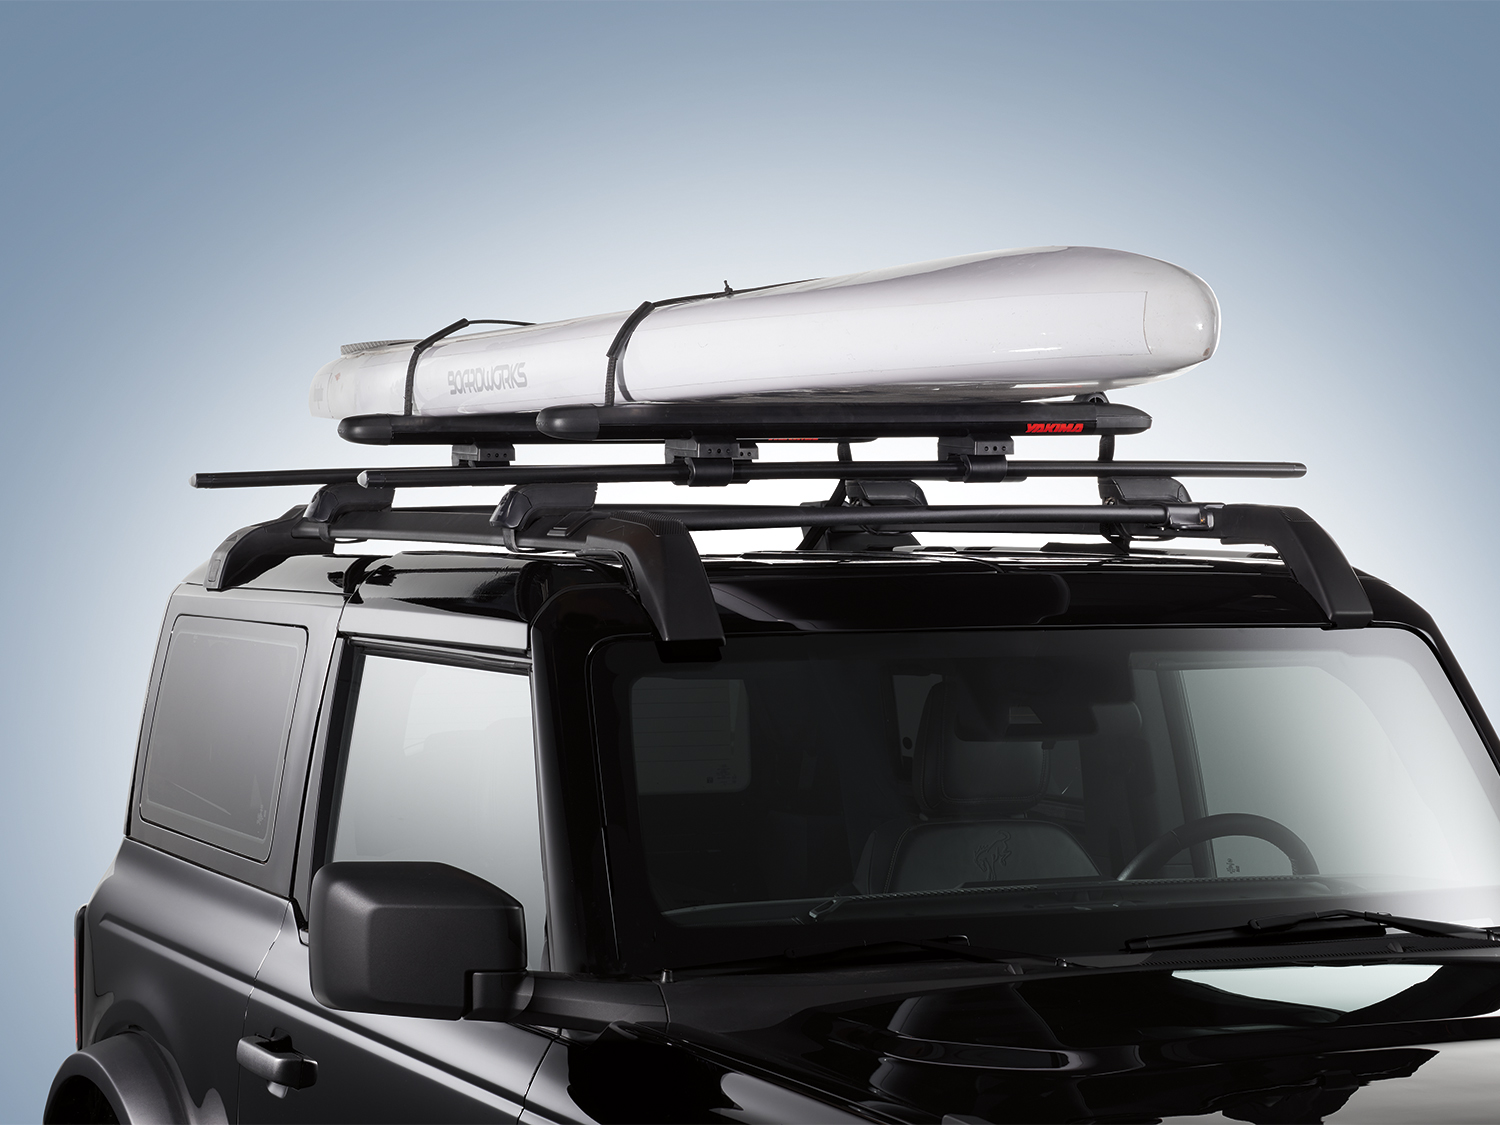 Image for Racks and Carriers by Yakima - Rack Mounted Paddleboard Carrier with Locks from AccessoriesCanada